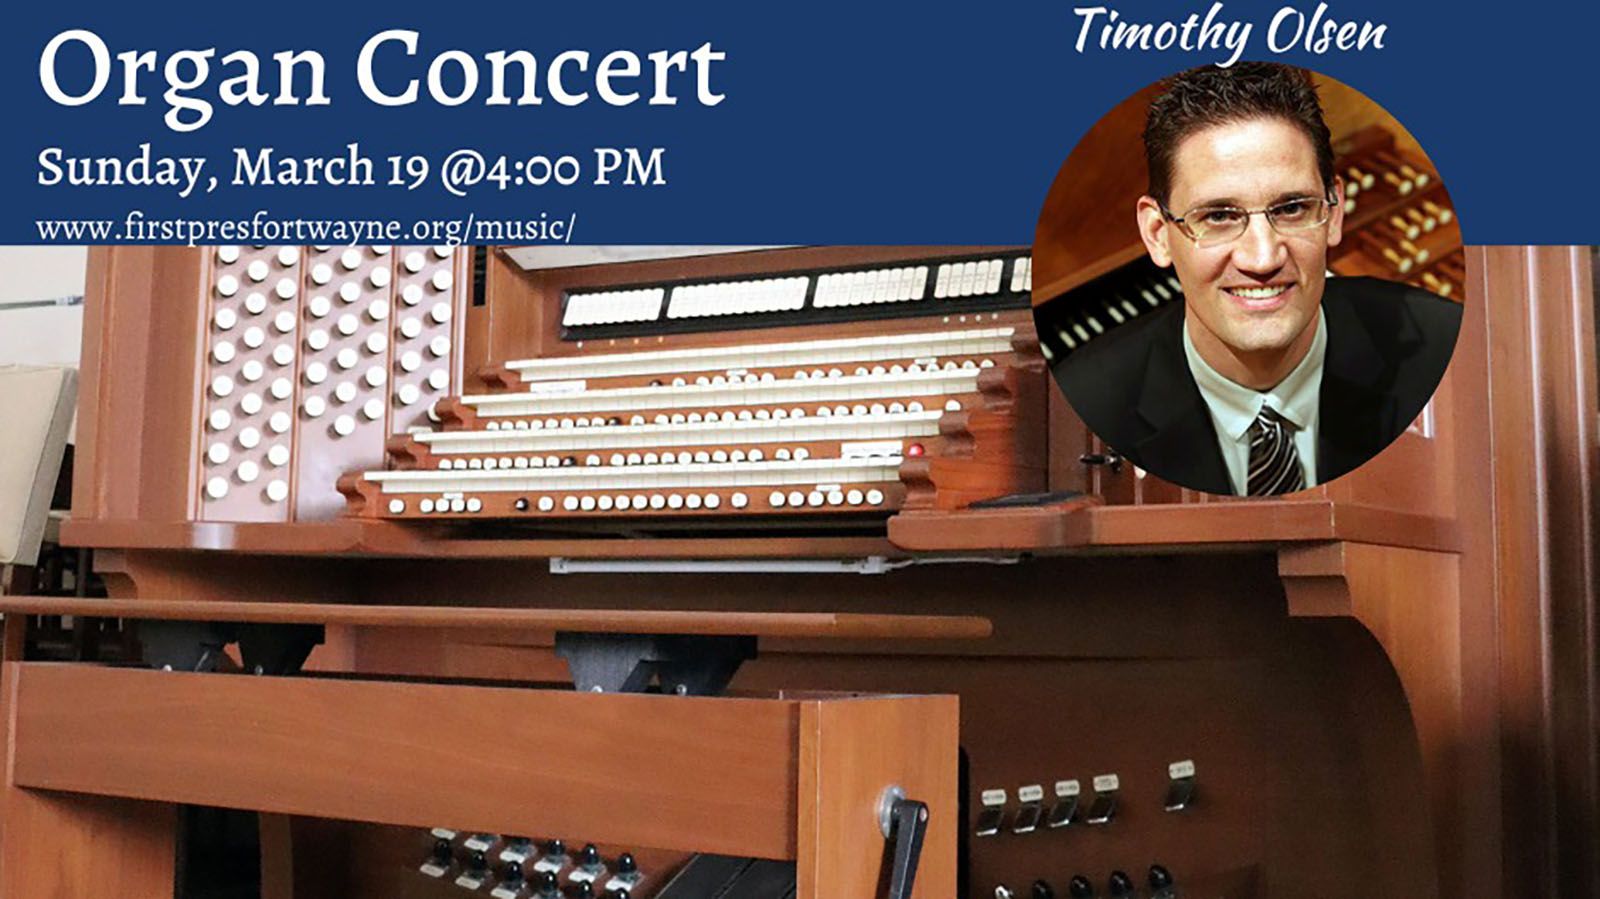 Organist Timothy Olsen will be at First Presbyterian Church on Sunday, March 19.